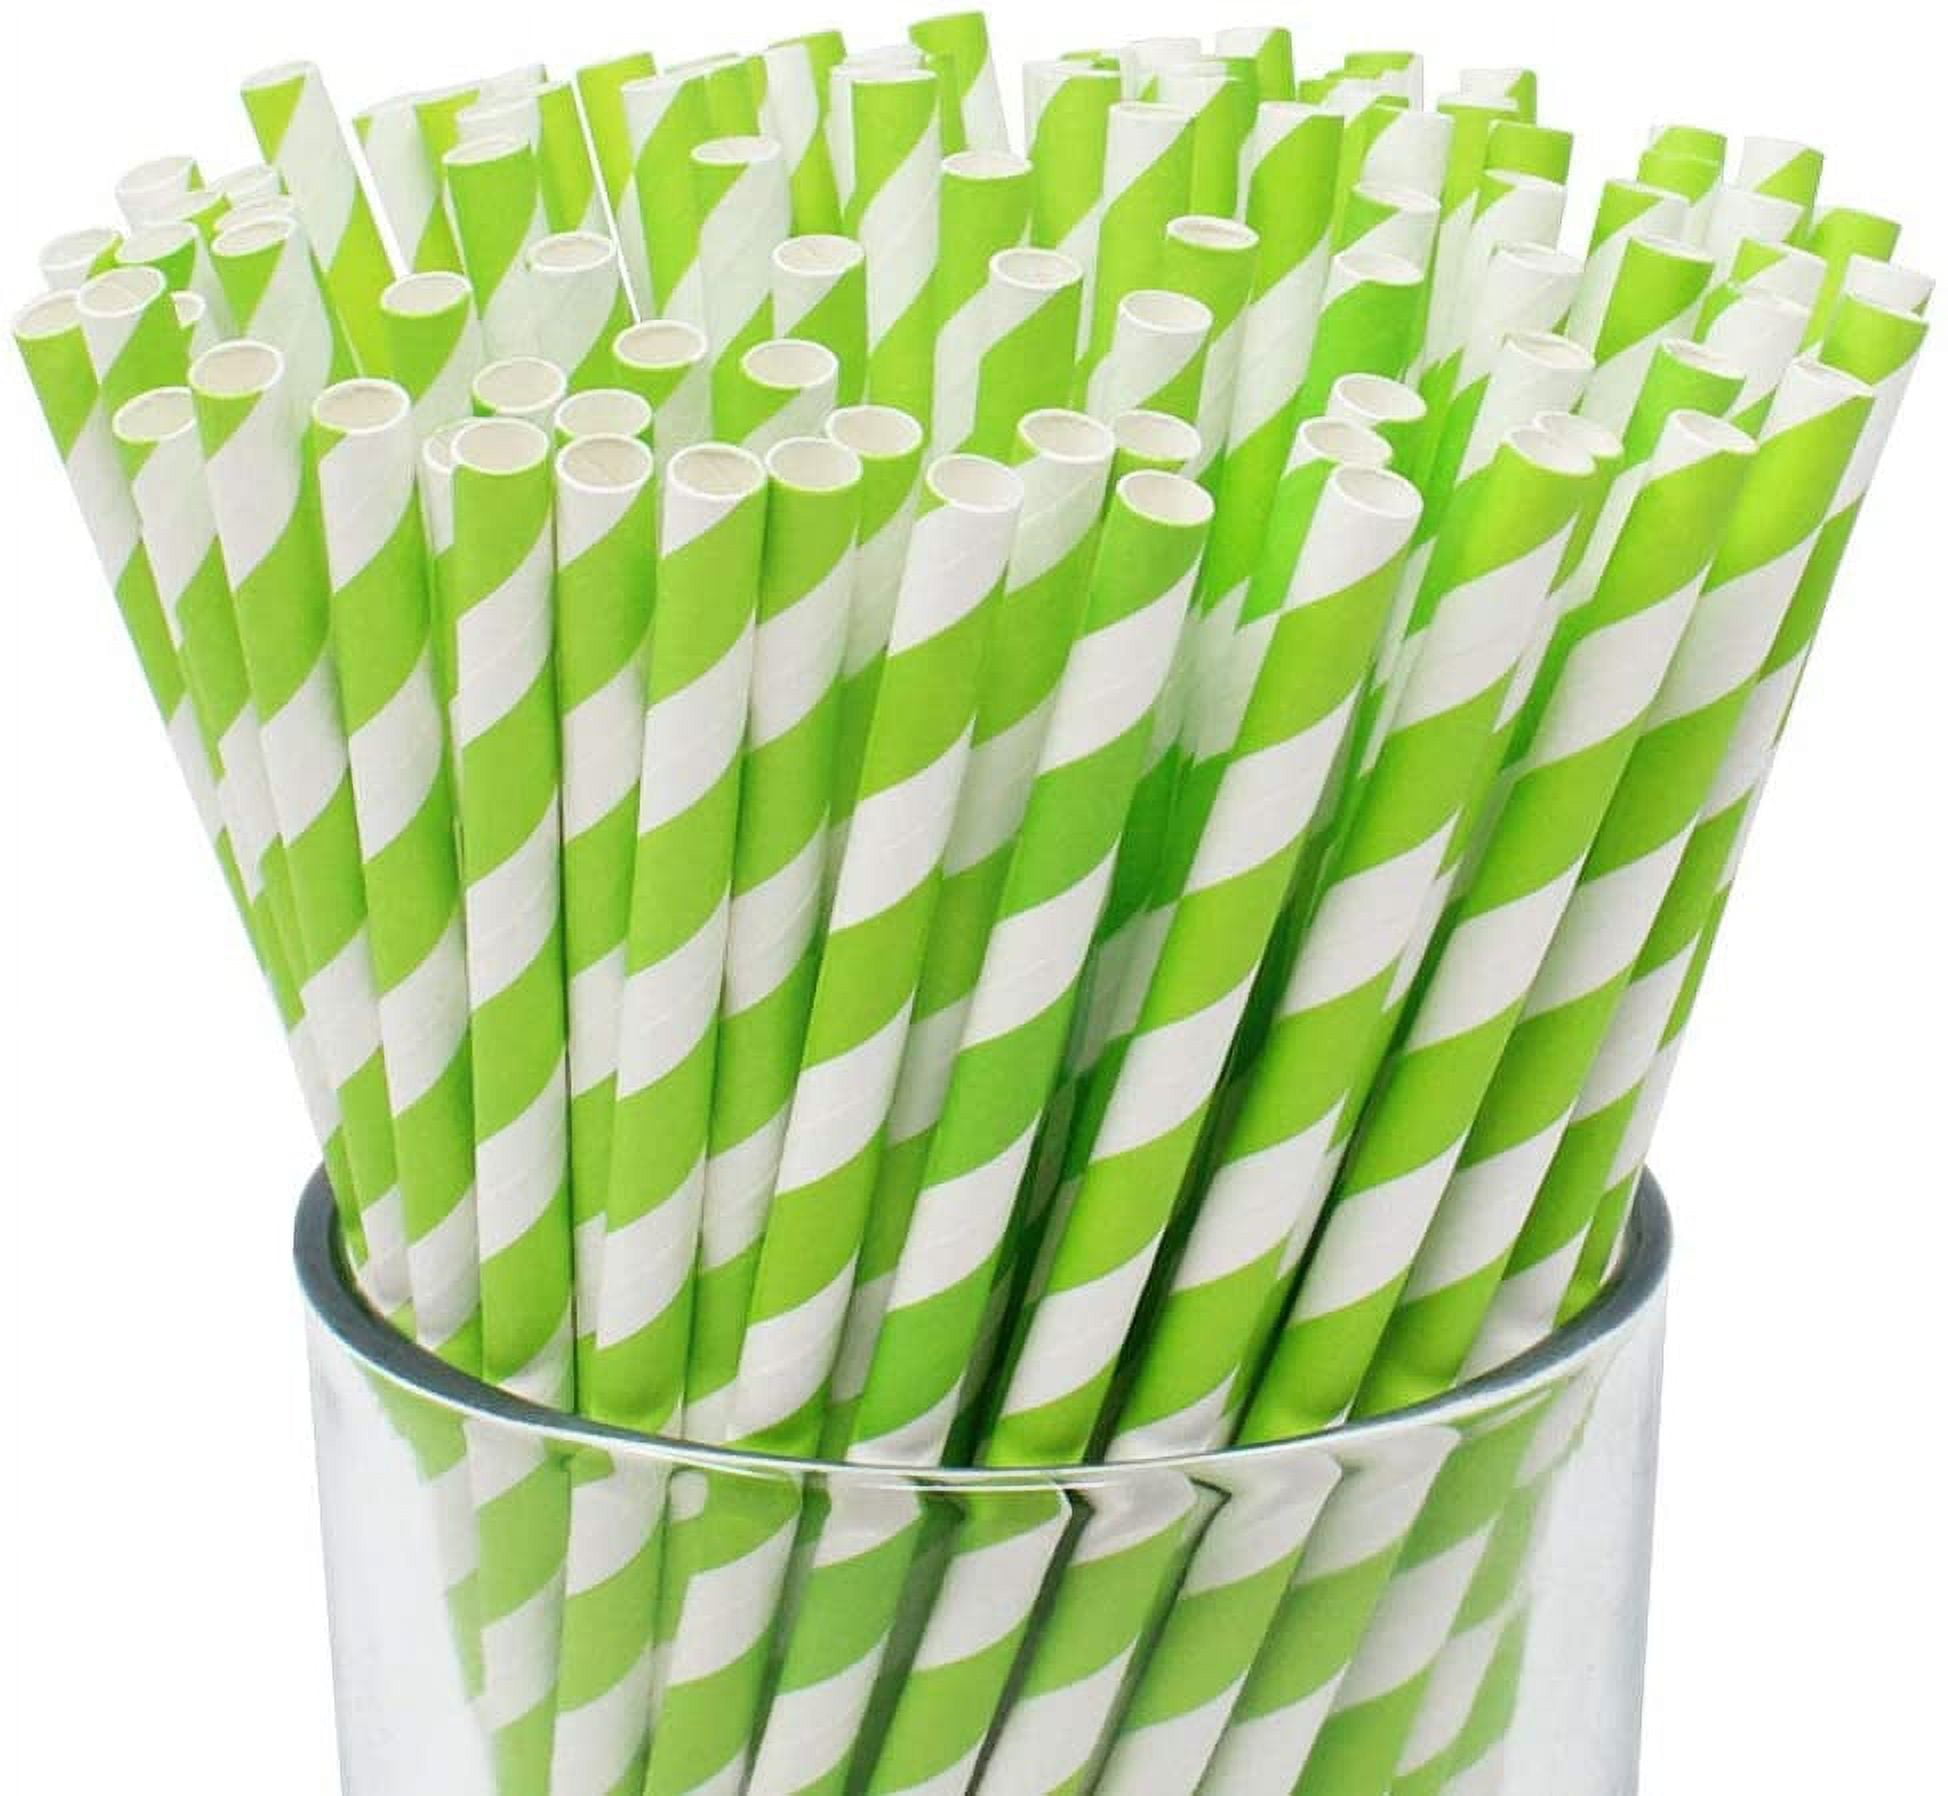 10 Notebook/Lined Paper Straws – Happyfox Supply Co